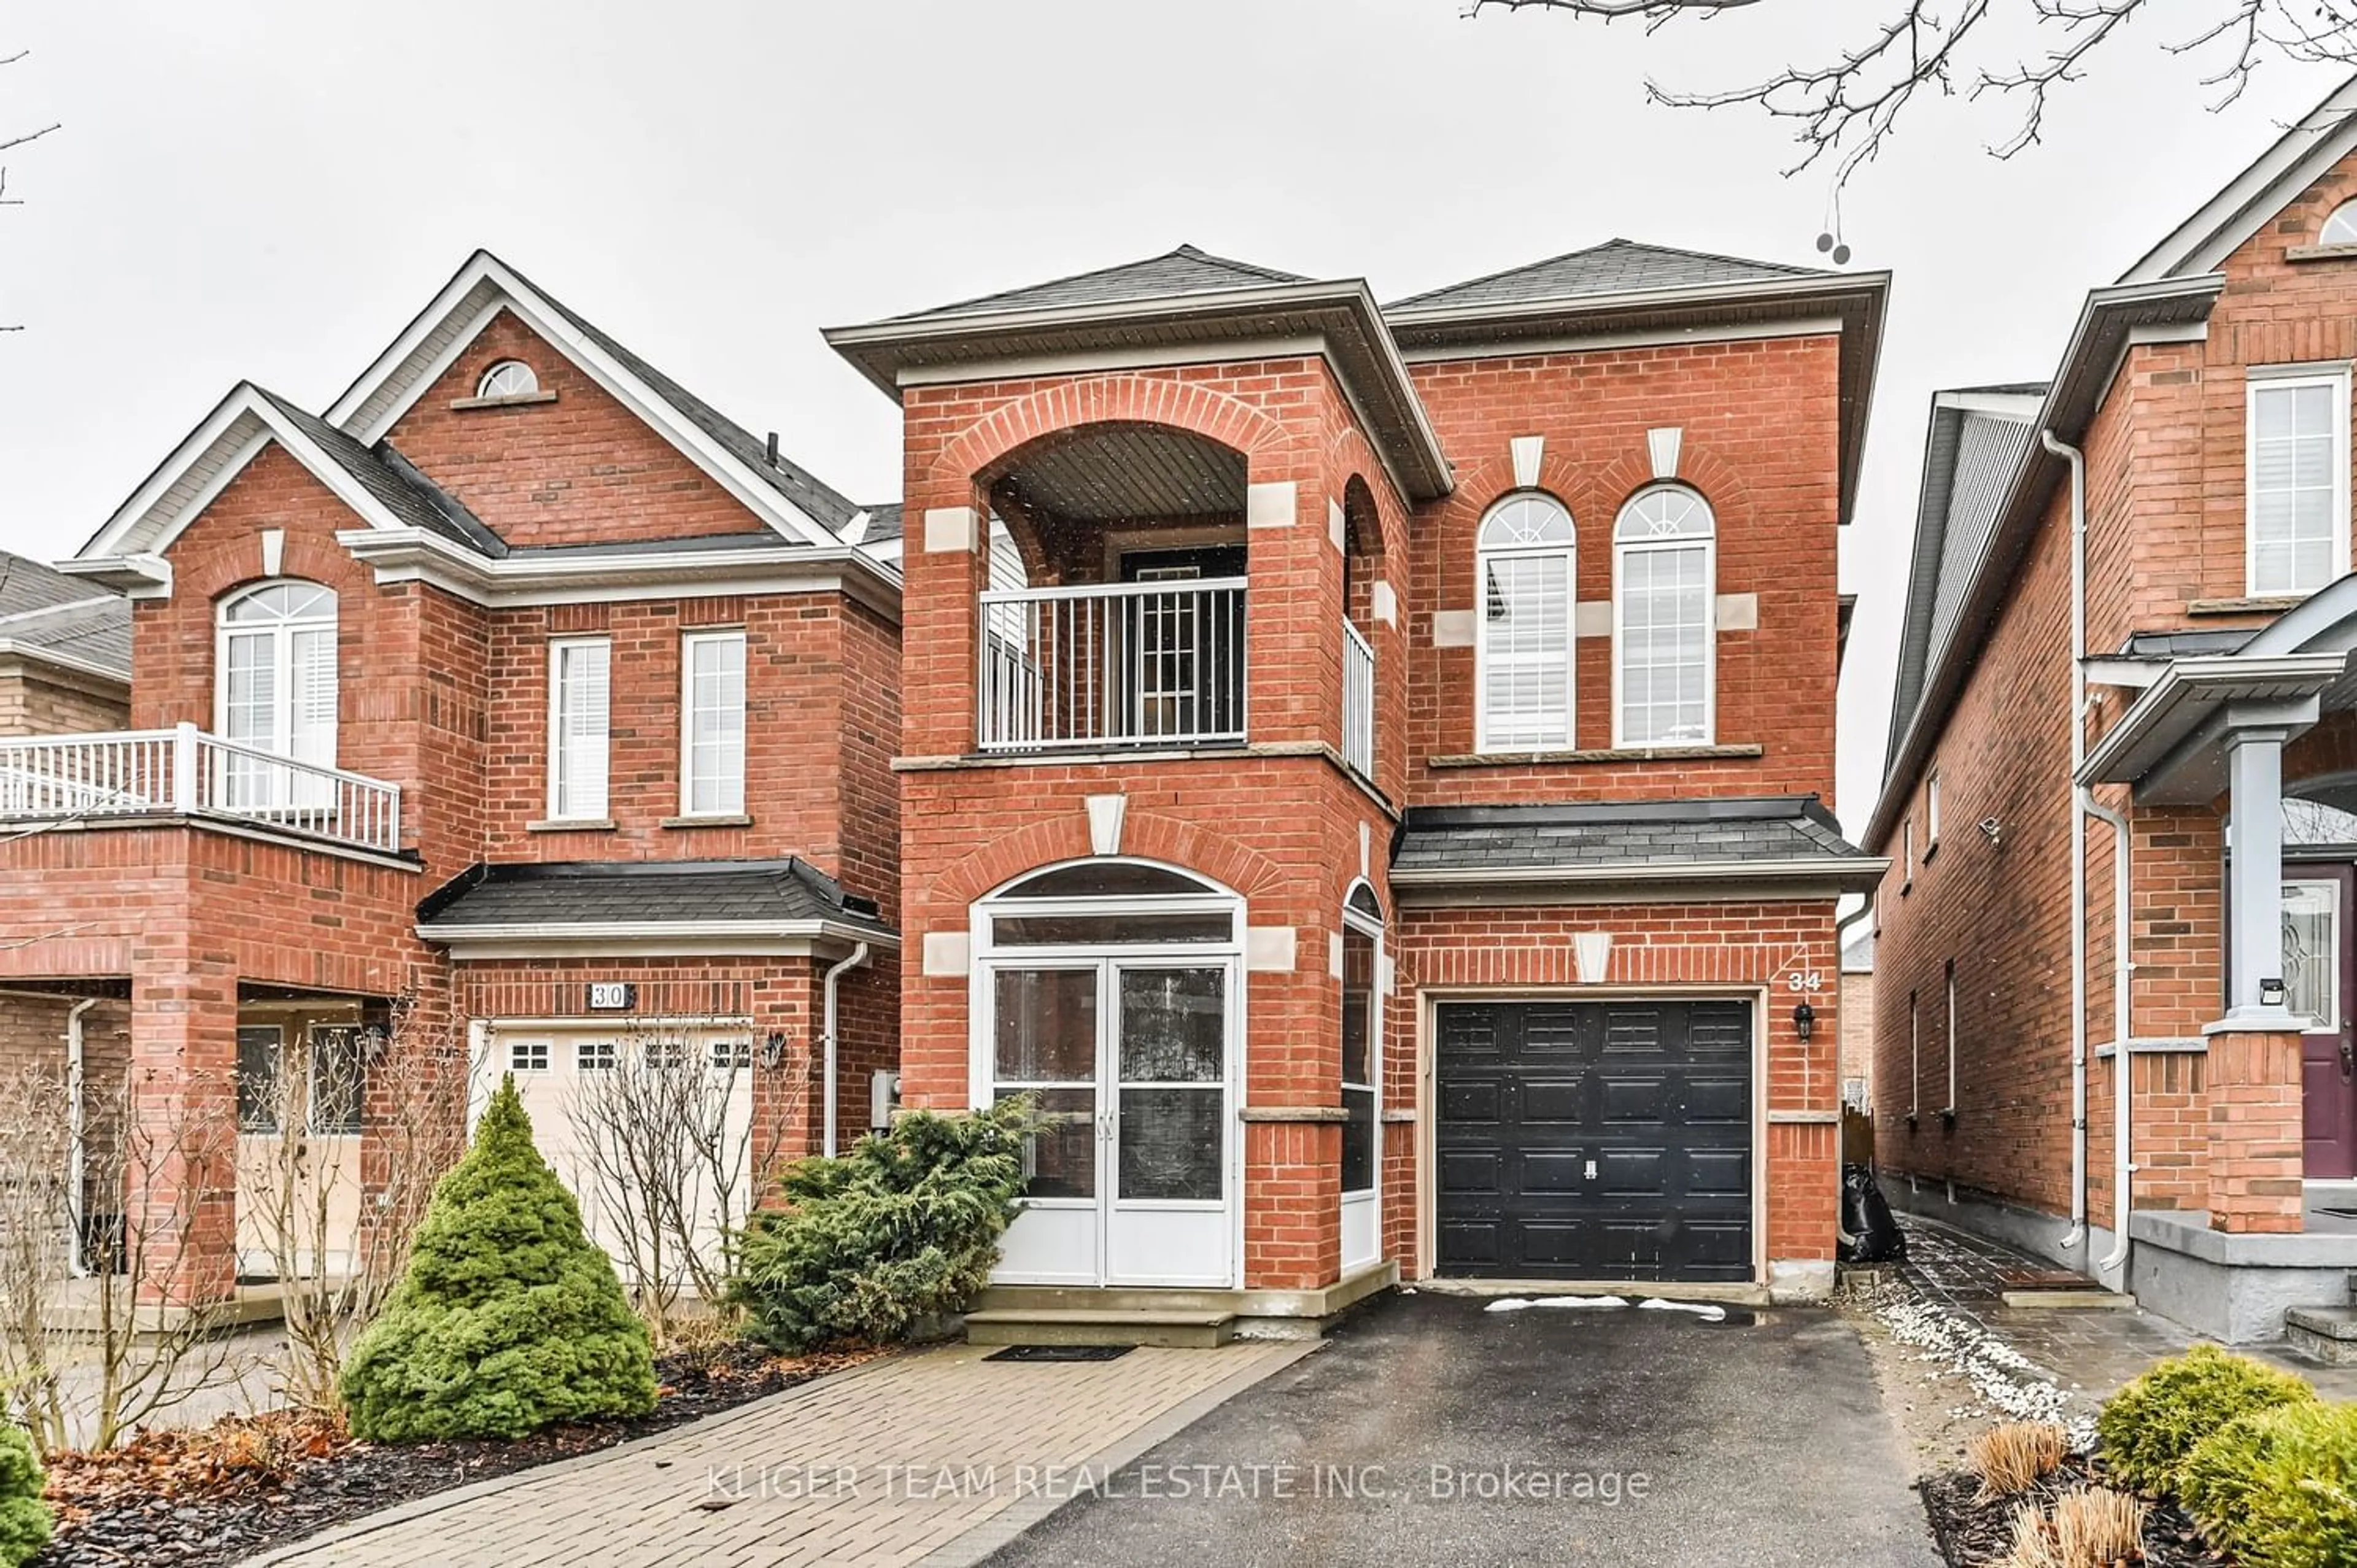 Home with brick exterior material for 34 Laramie Cres, Vaughan Ontario L6A 0P8